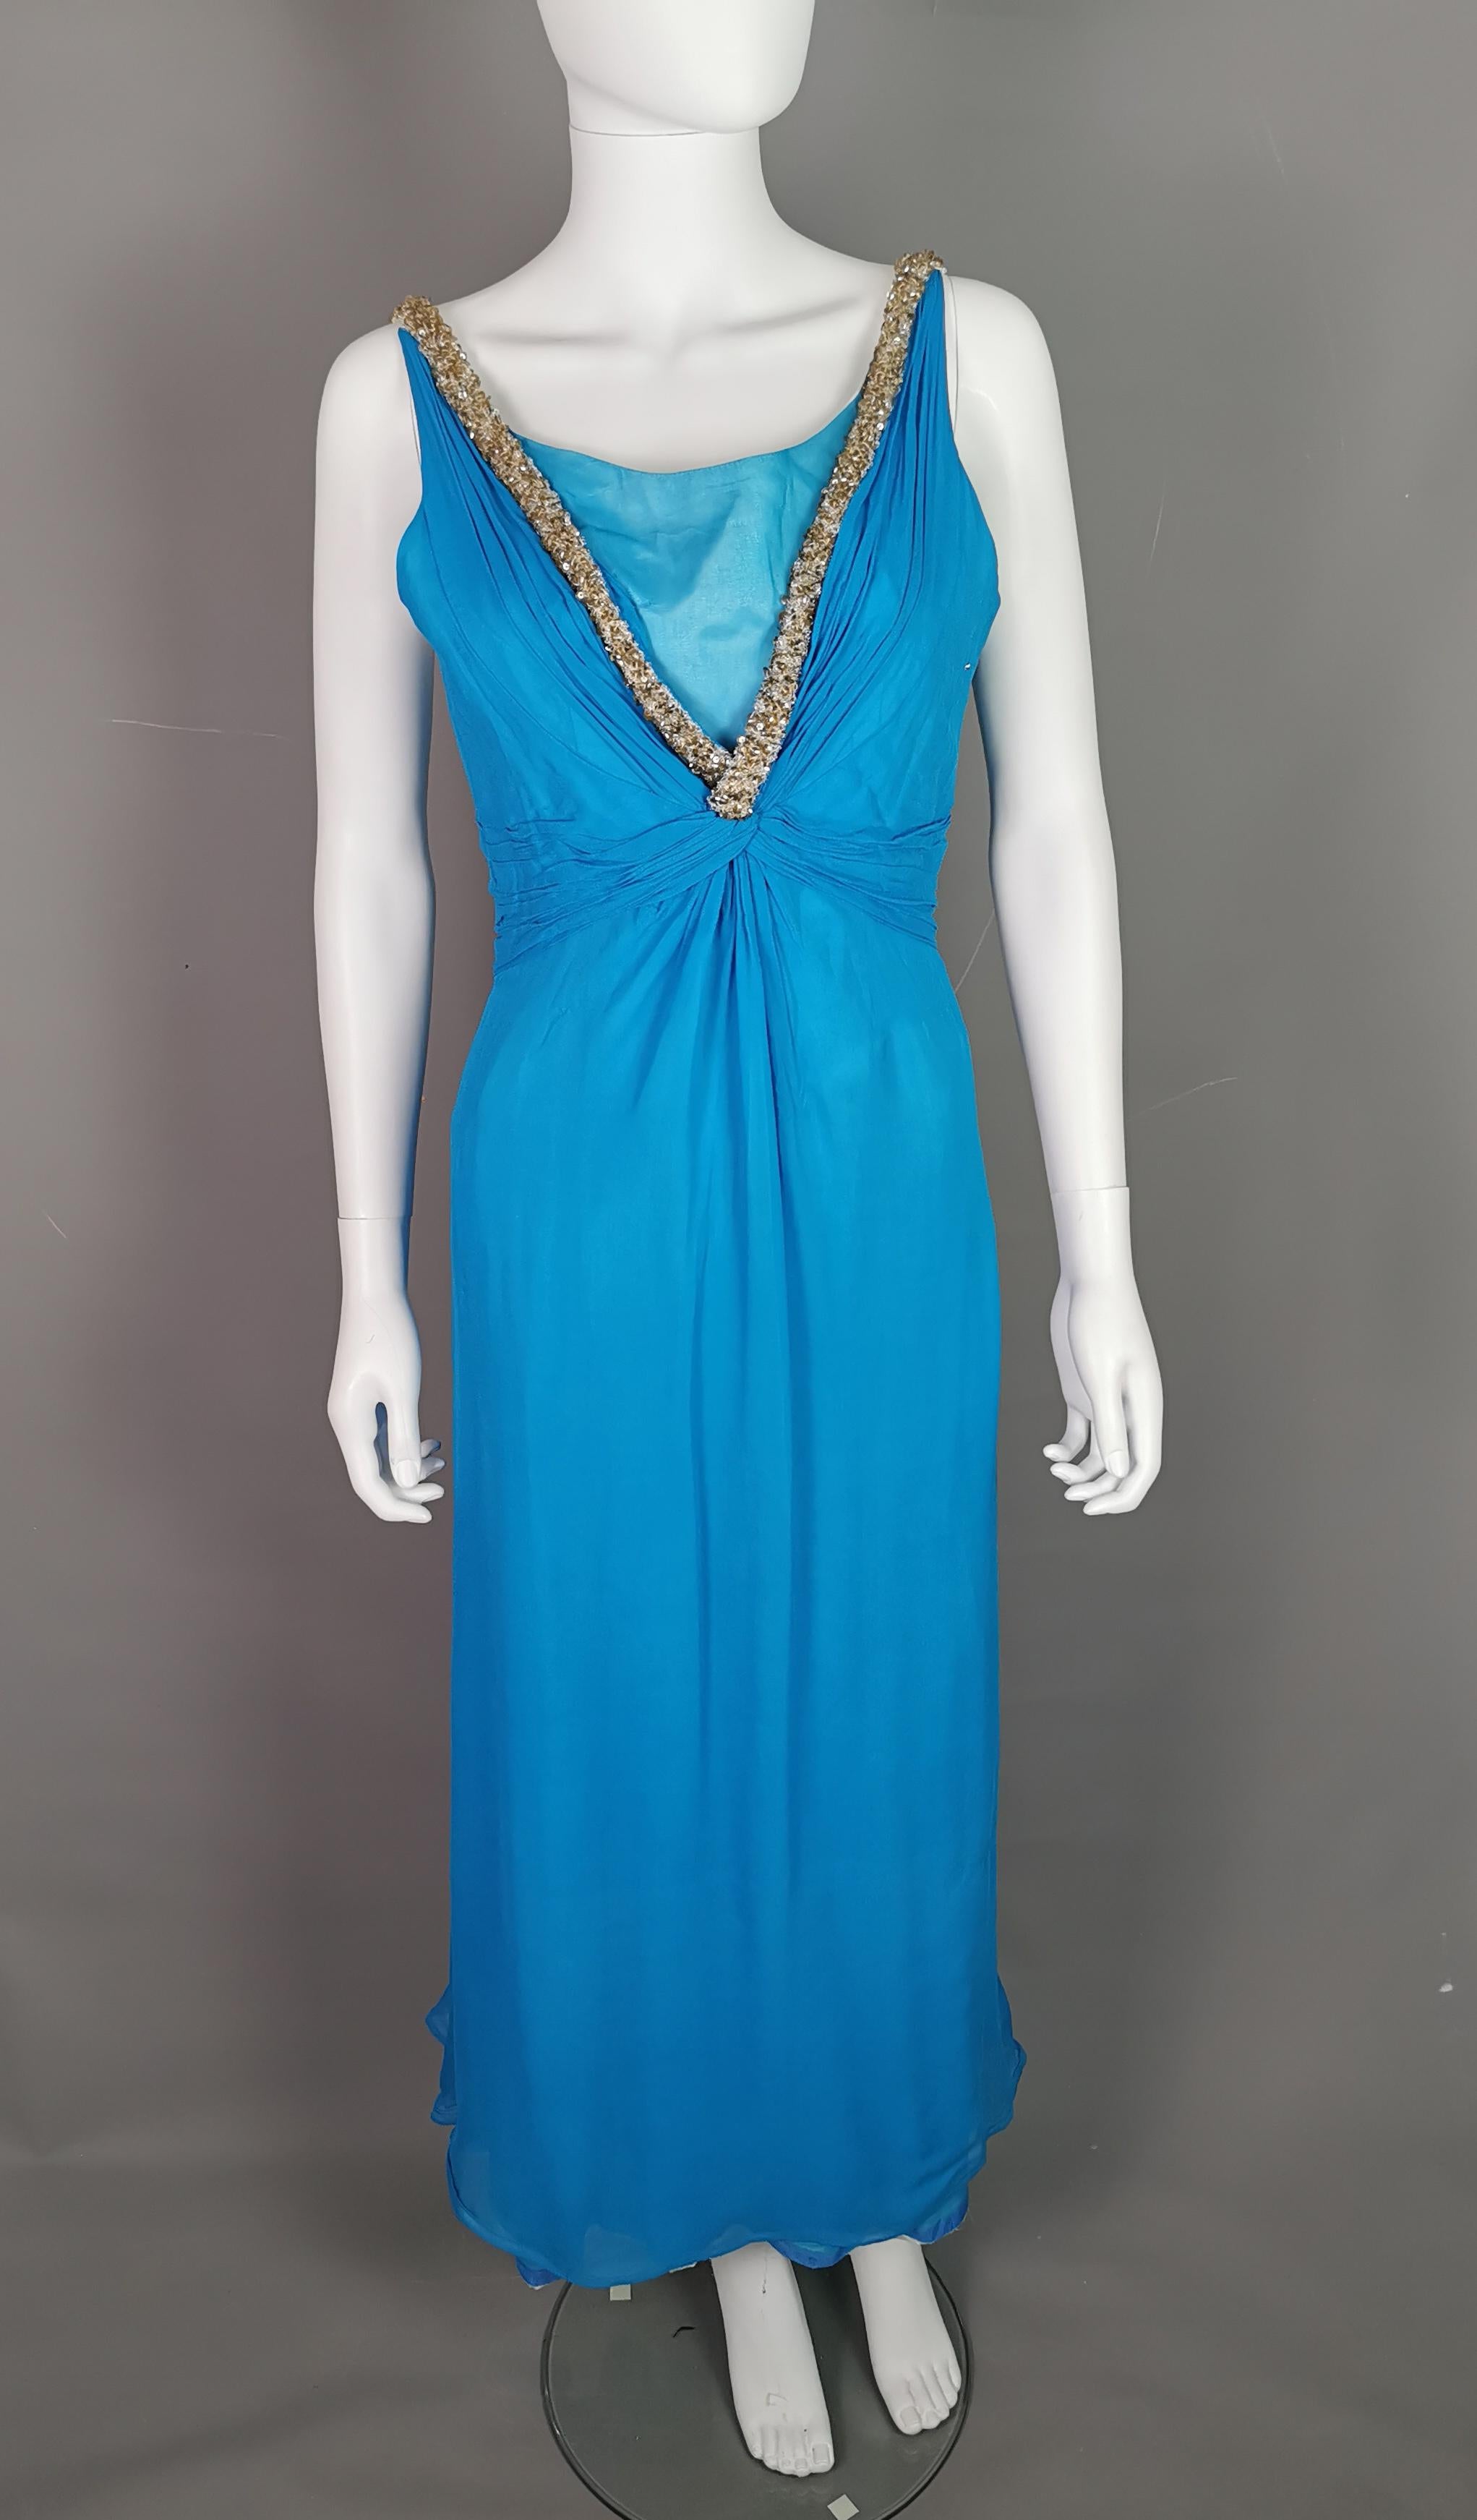 A beautiful vintage c1970s evening dress by Emma Domb.

This dress has such a princess feel to it, it is a long length with a vibrant blue silk chiffon. Overlay and a modesty panel to the V neckline.

The straps and neckline are adorned with clear